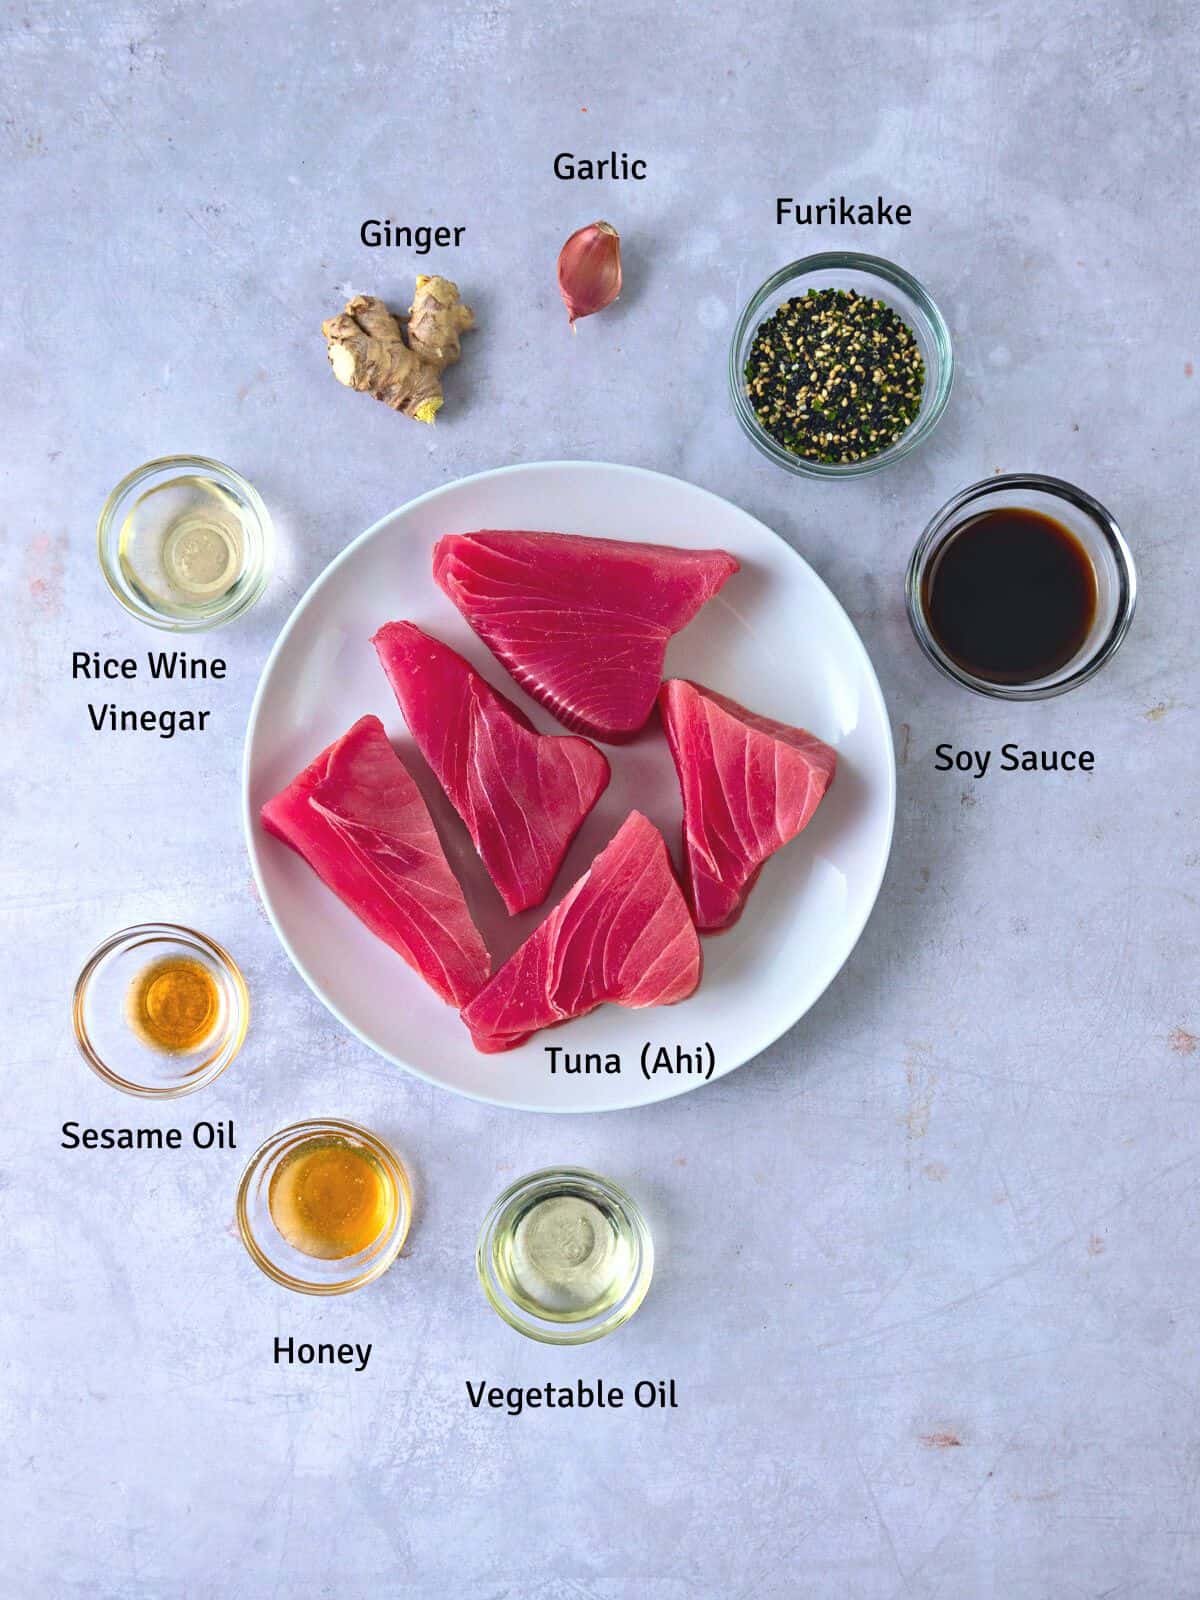 Ingredients to make seared ahi with furikake, including raw tuna, soy sauce, ginger and garlic.